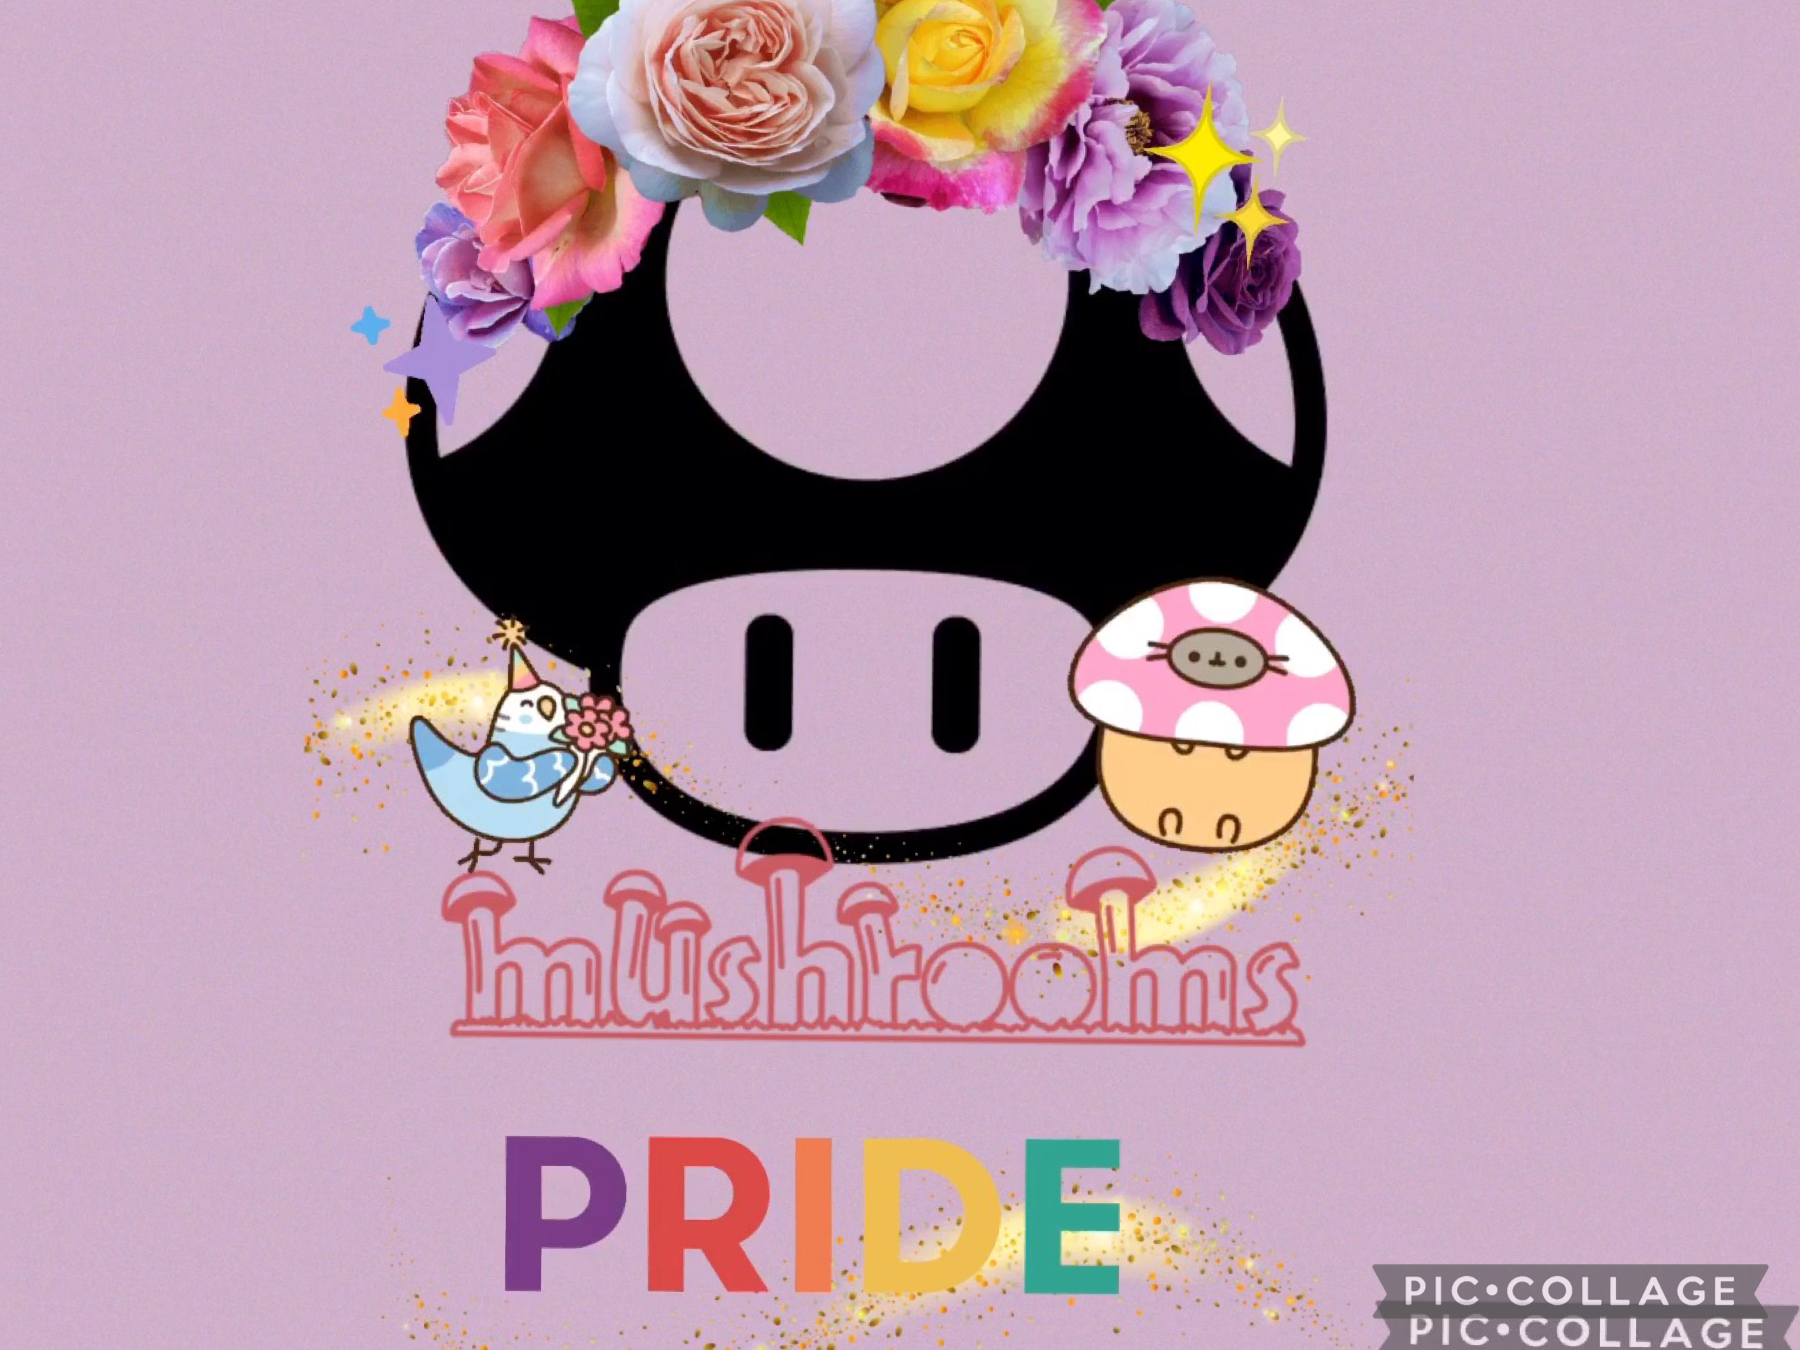 New Profile??? Yall know I had to add pusheen characters!